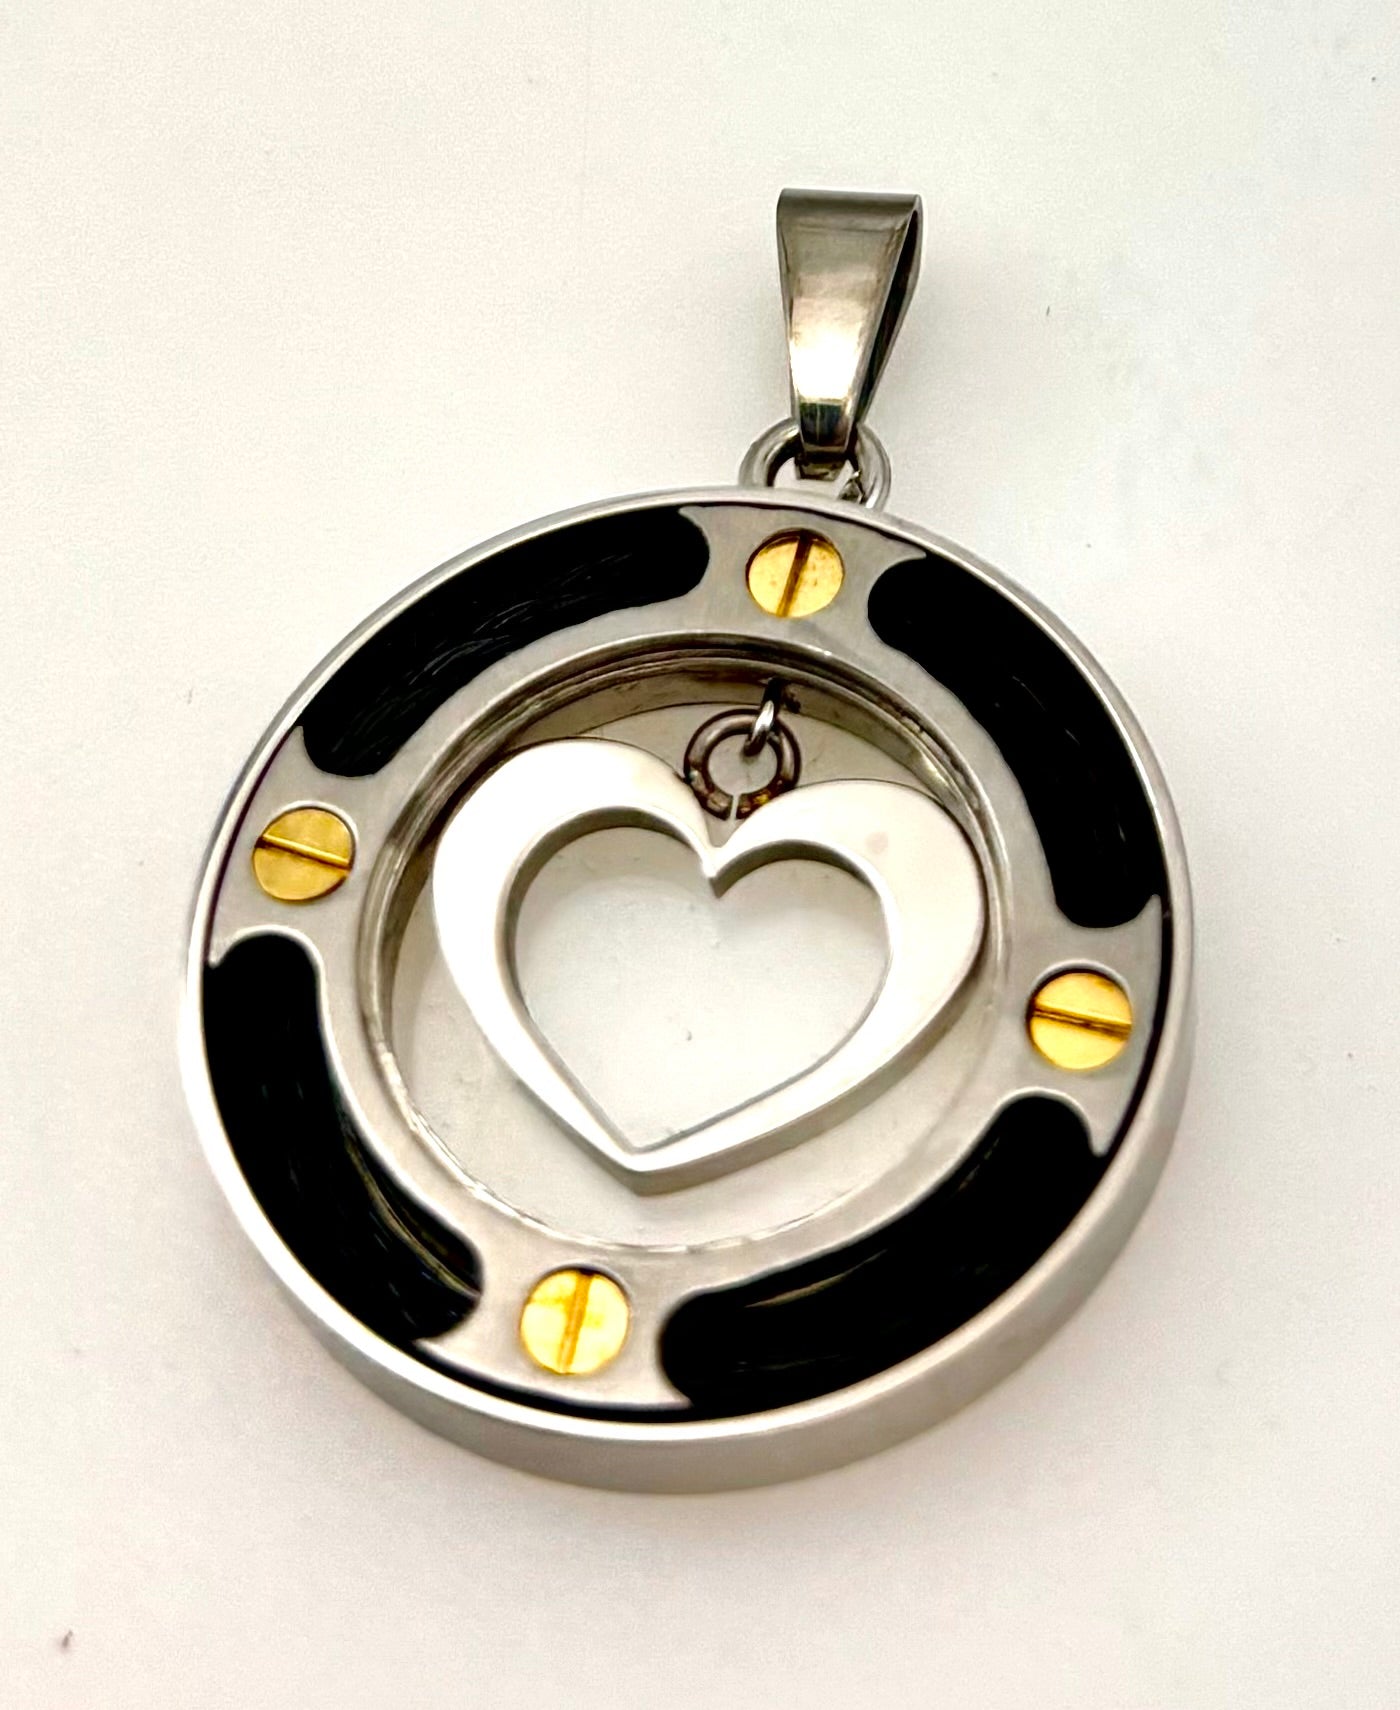 JEWELRY CIRCLE WITH BLACK ENMEL AND HEART IN CENTER